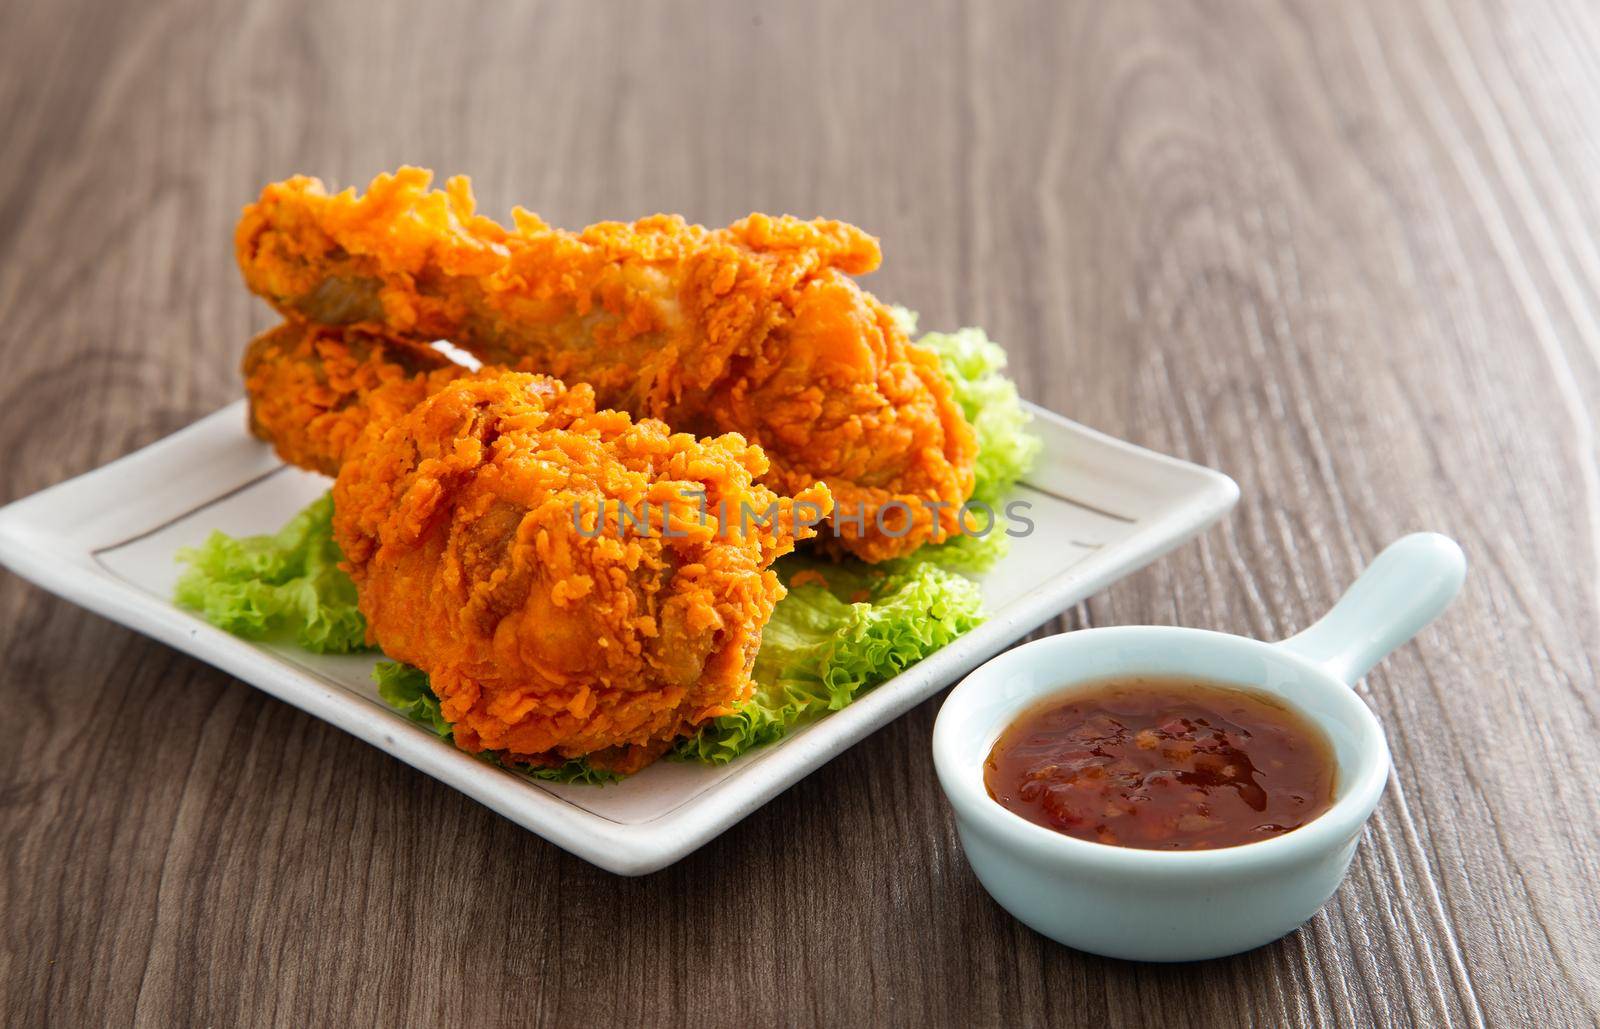 crispy and golden fried chickens with sauce on wooden table